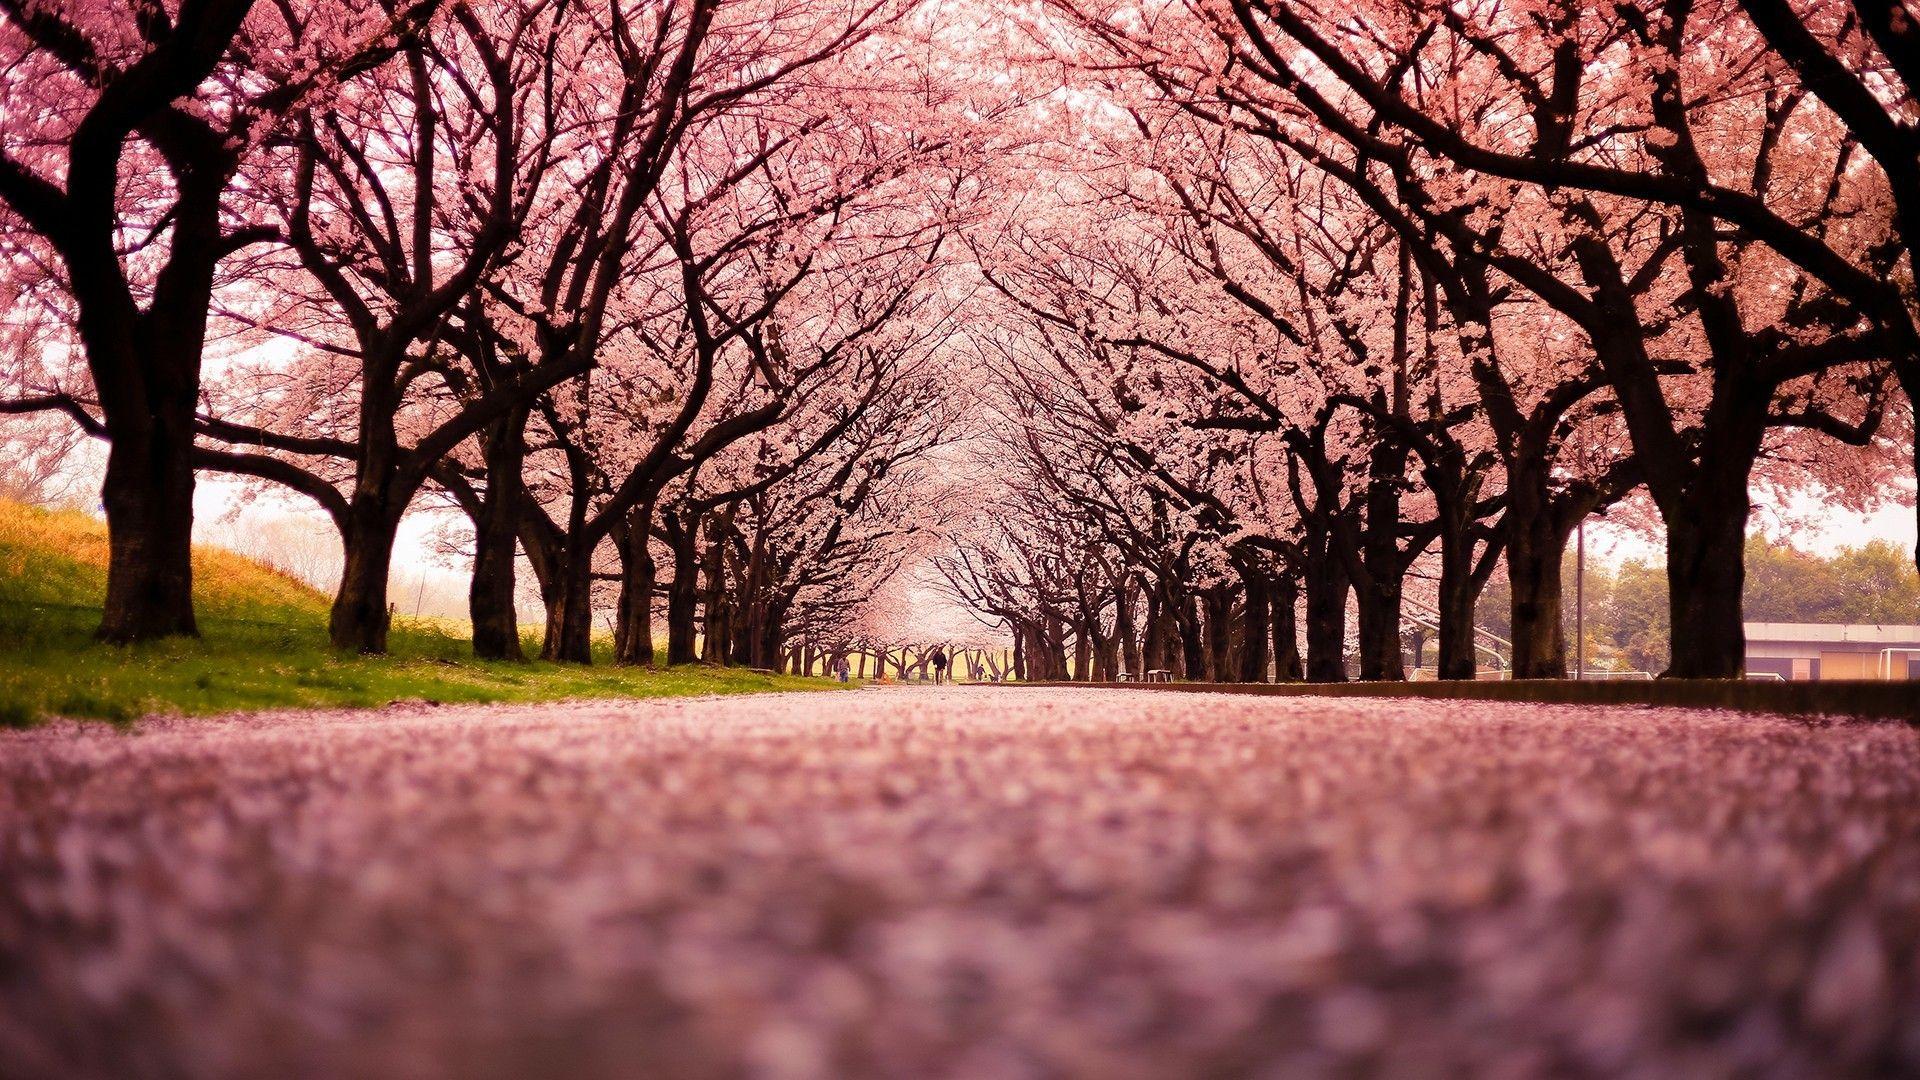 Pink cherry blossoms alley wallpaper and image